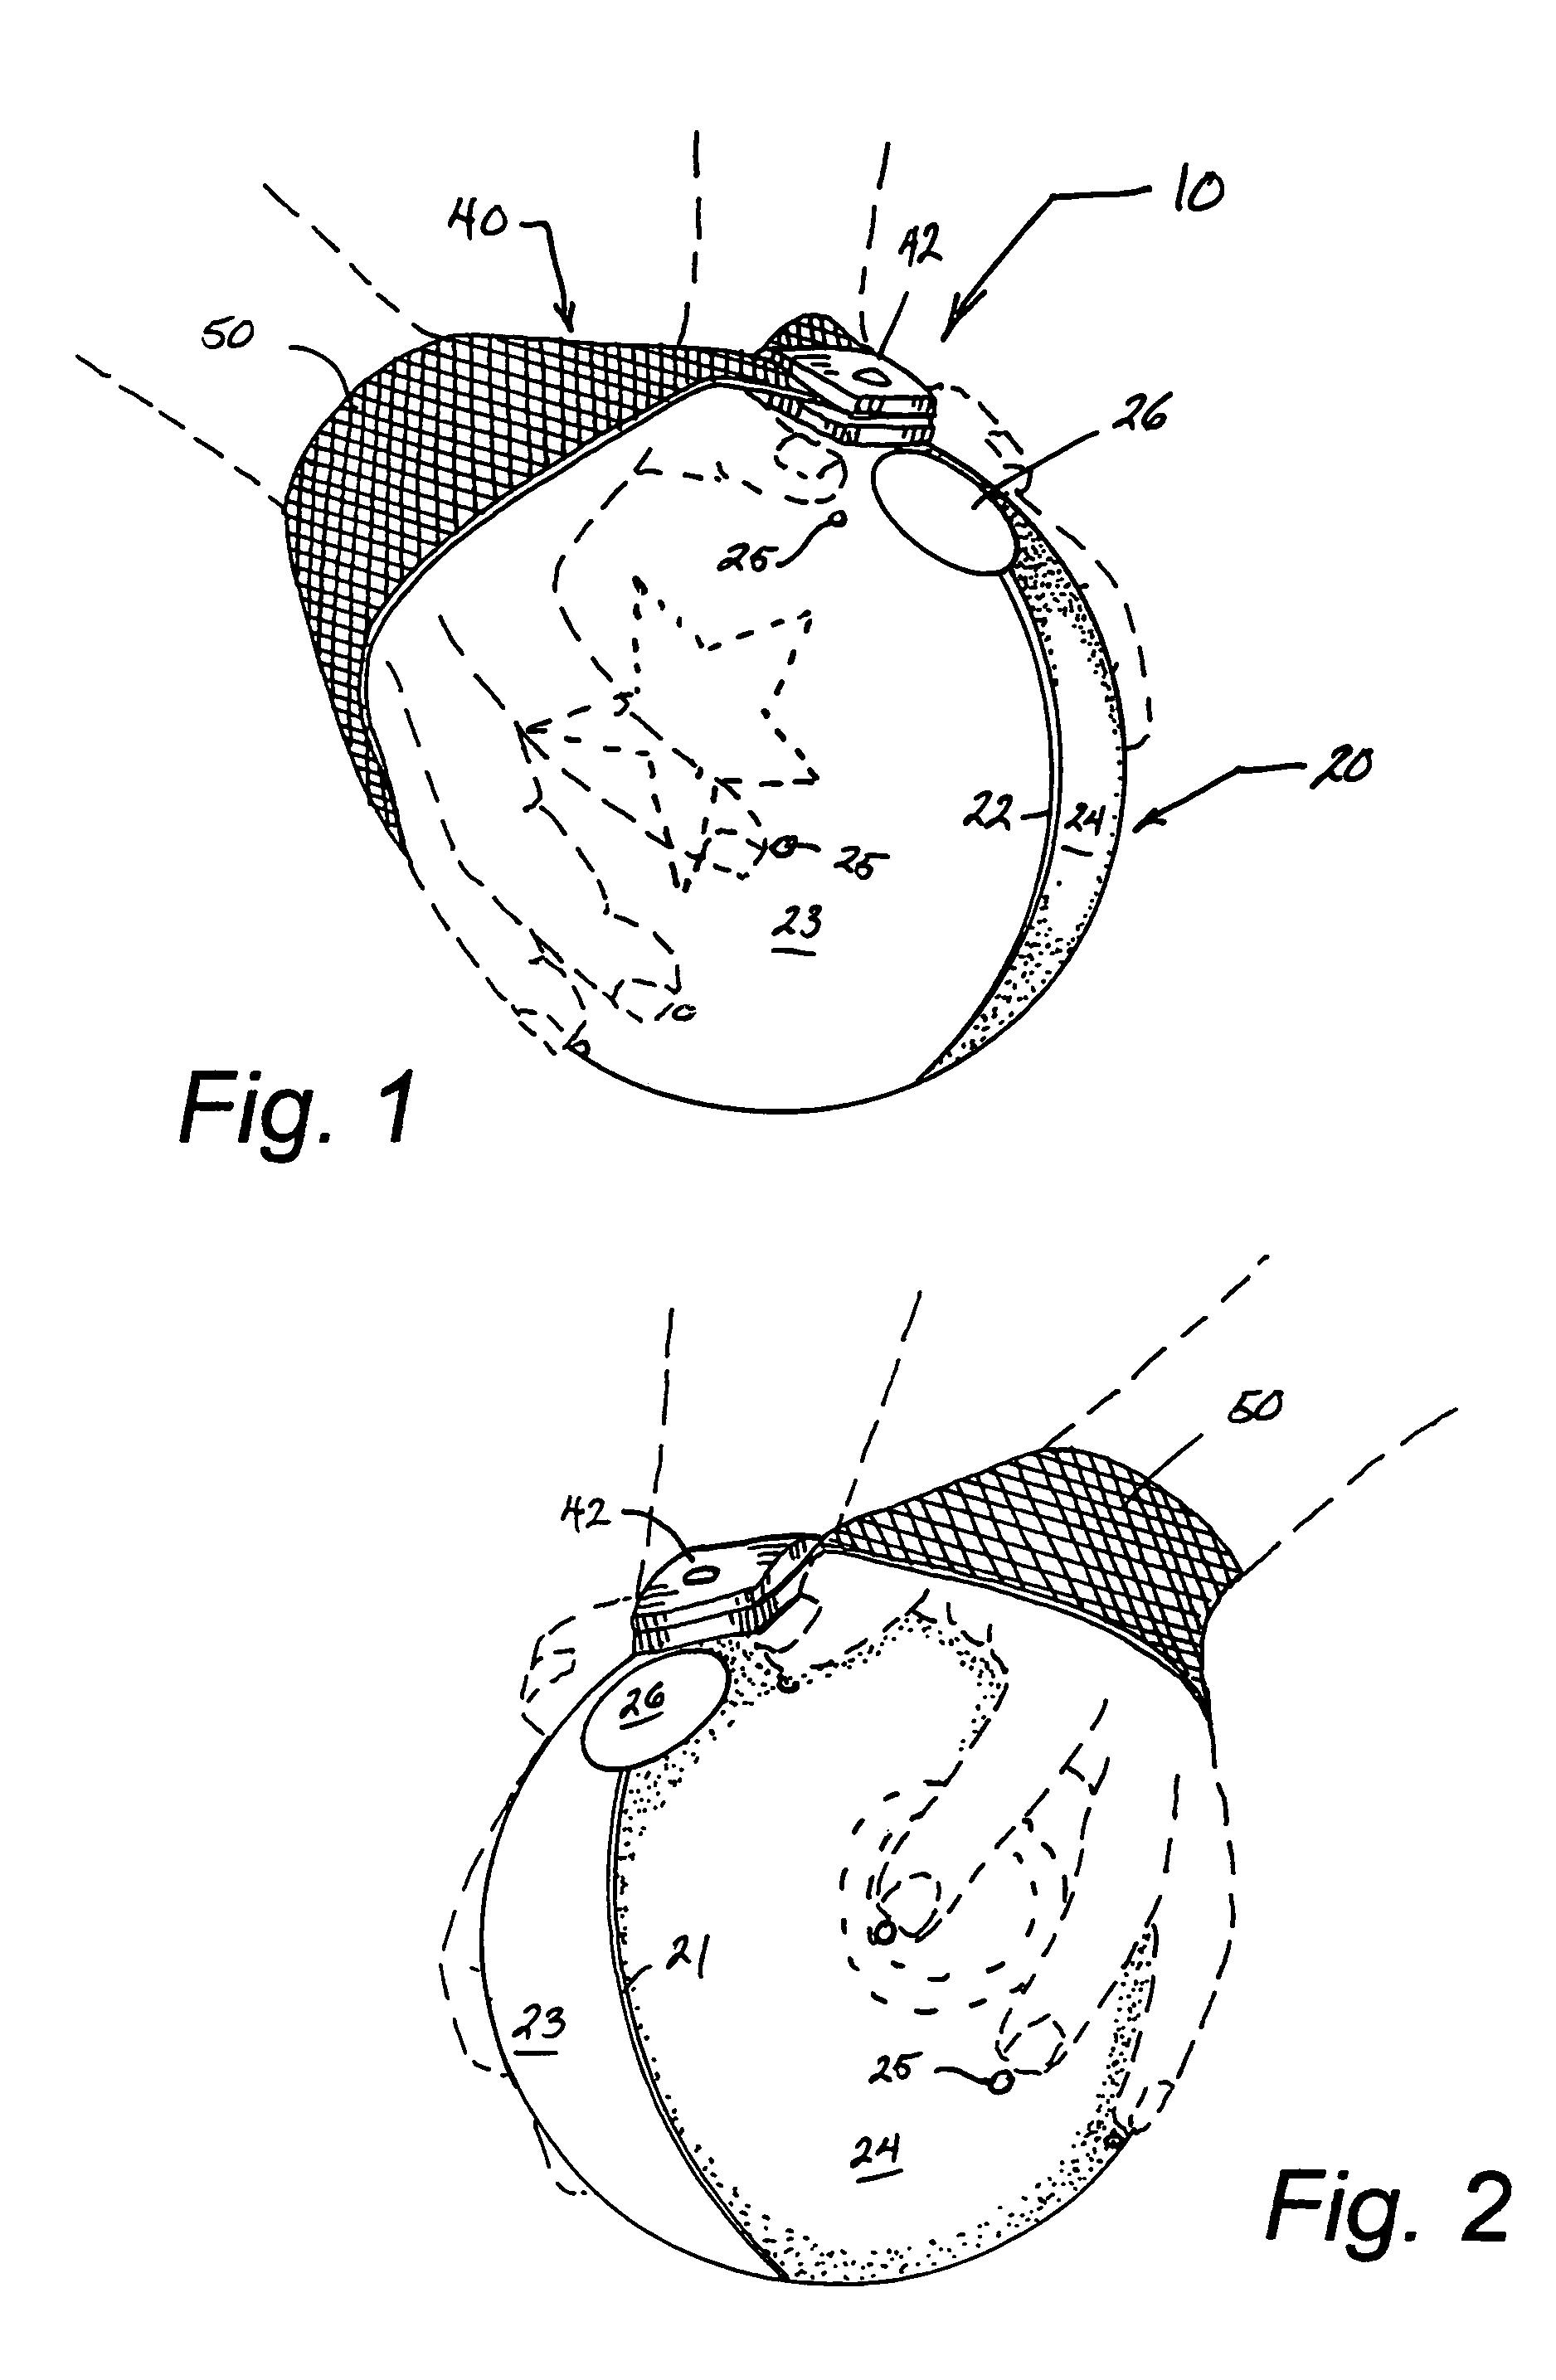 Golf swing training device and method of use